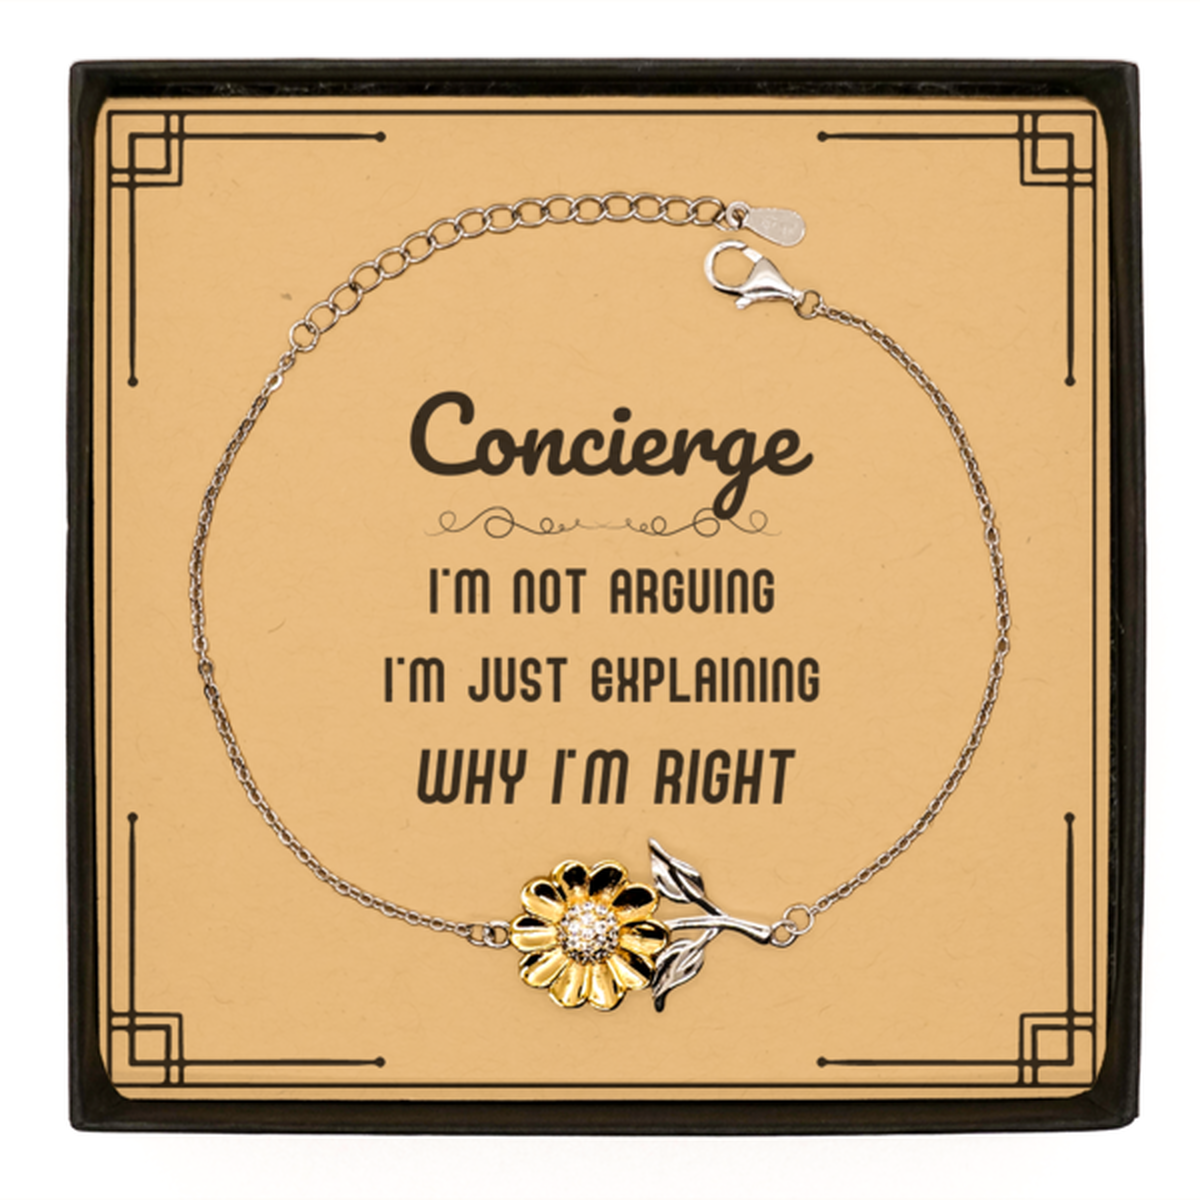 Concierge I'm not Arguing. I'm Just Explaining Why I'm RIGHT Sunflower Bracelet, Funny Saying Quote Concierge Gifts For Concierge Message Card Graduation Birthday Christmas Gifts for Men Women Coworker